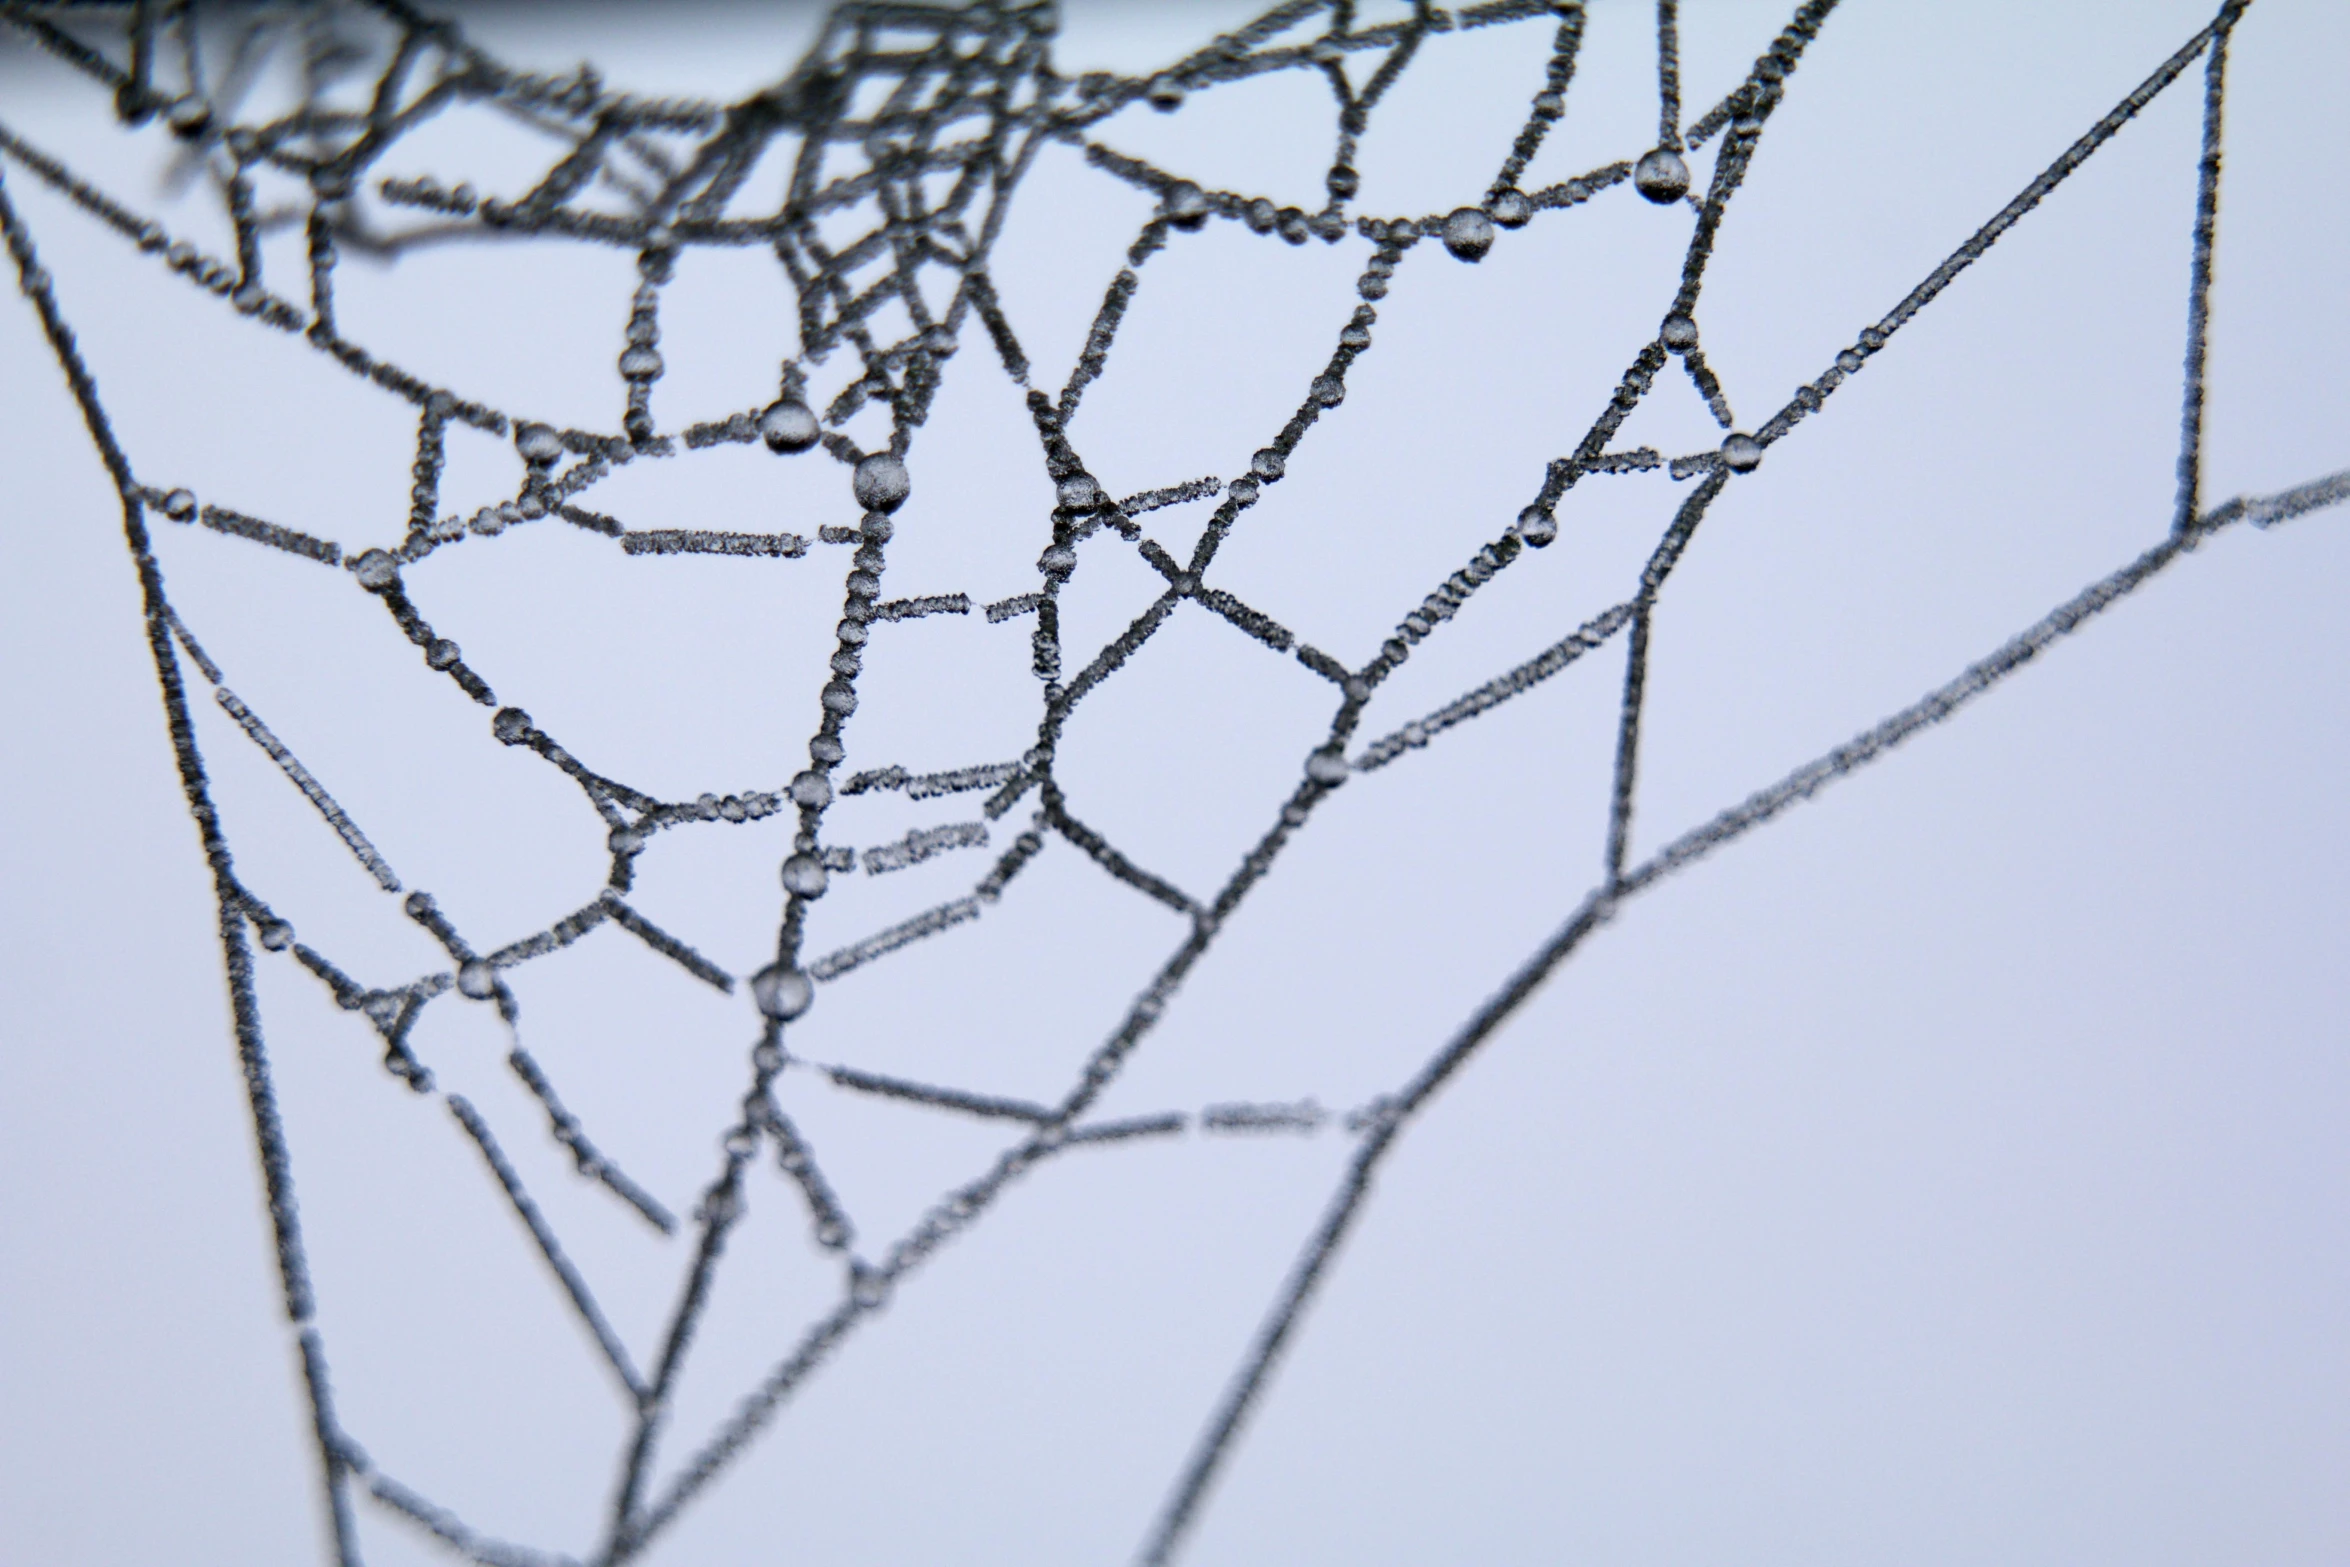 spider web pattern from inside an umbrella with rain drops